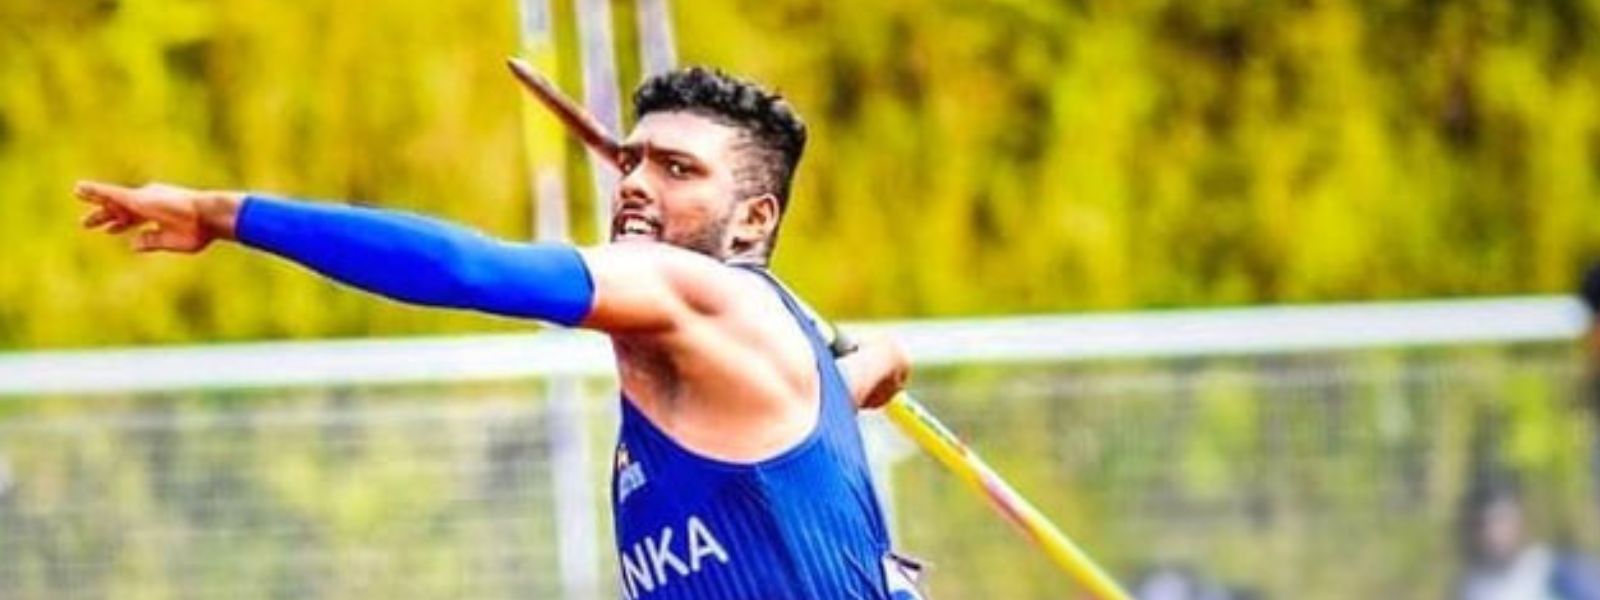 SL wins gold at the Asian Throwing Championship